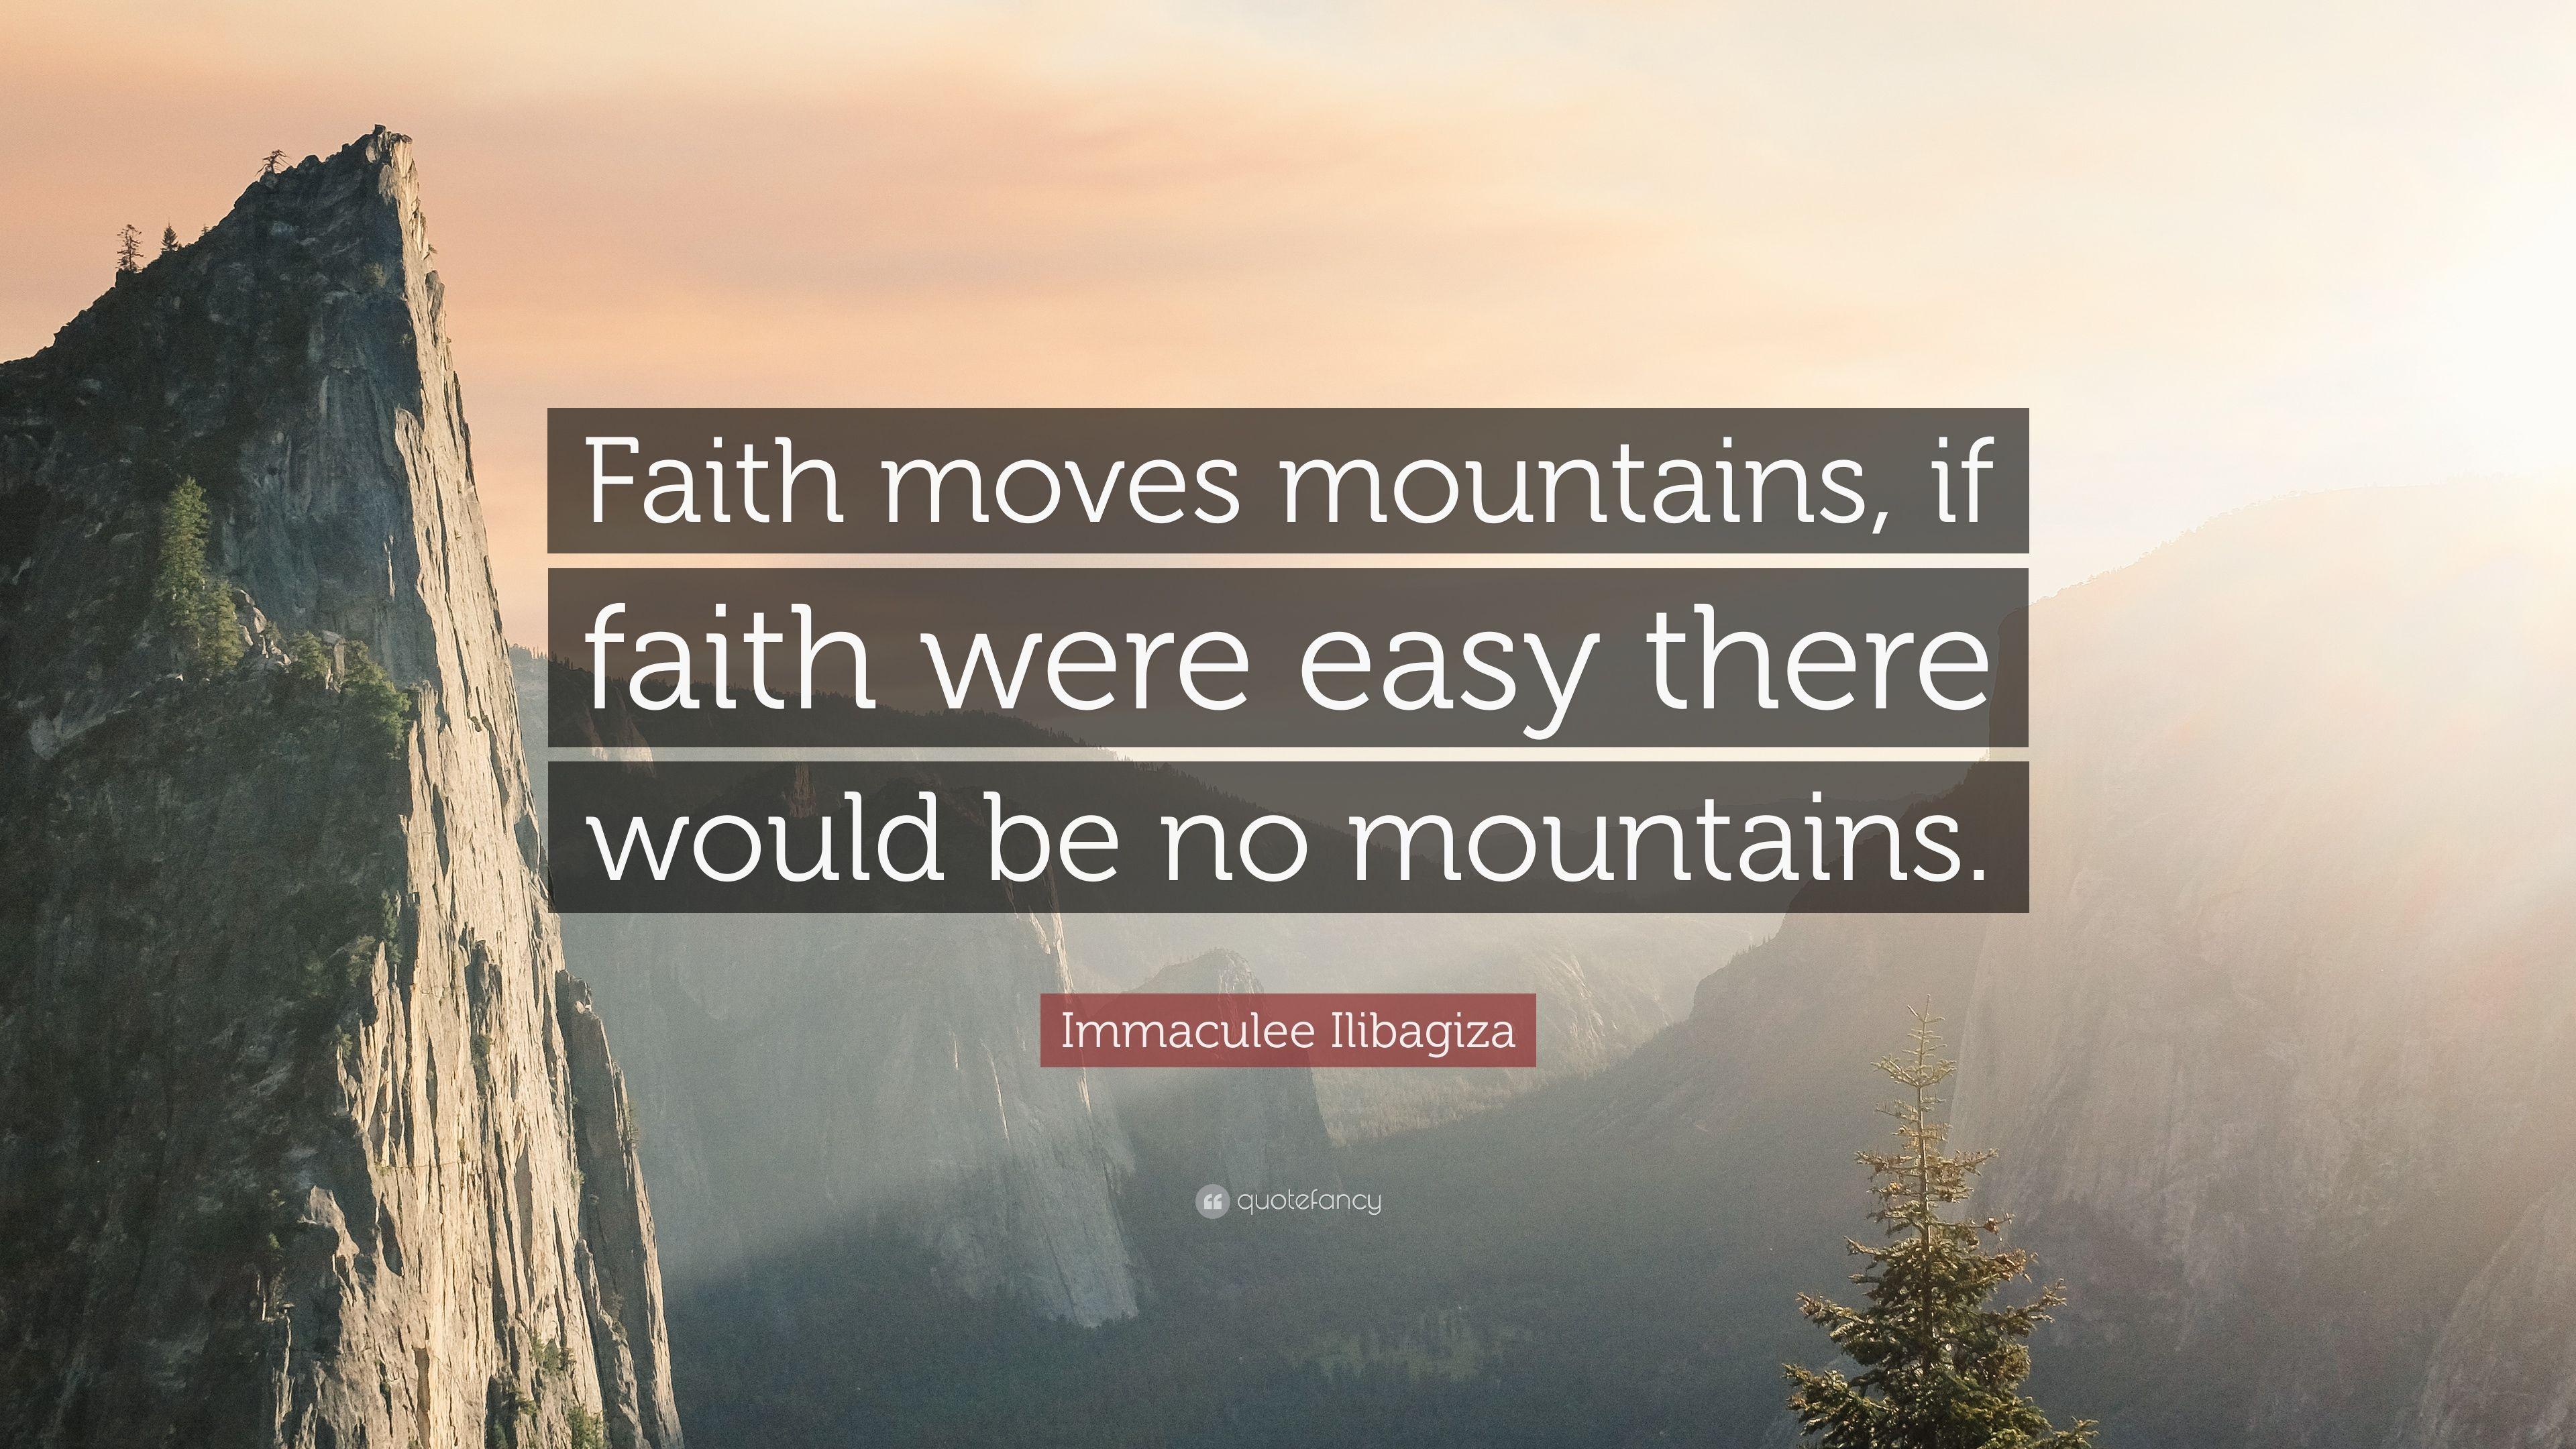 Immaculee Ilibagiza Quote: “Faith moves mountains, if faith were